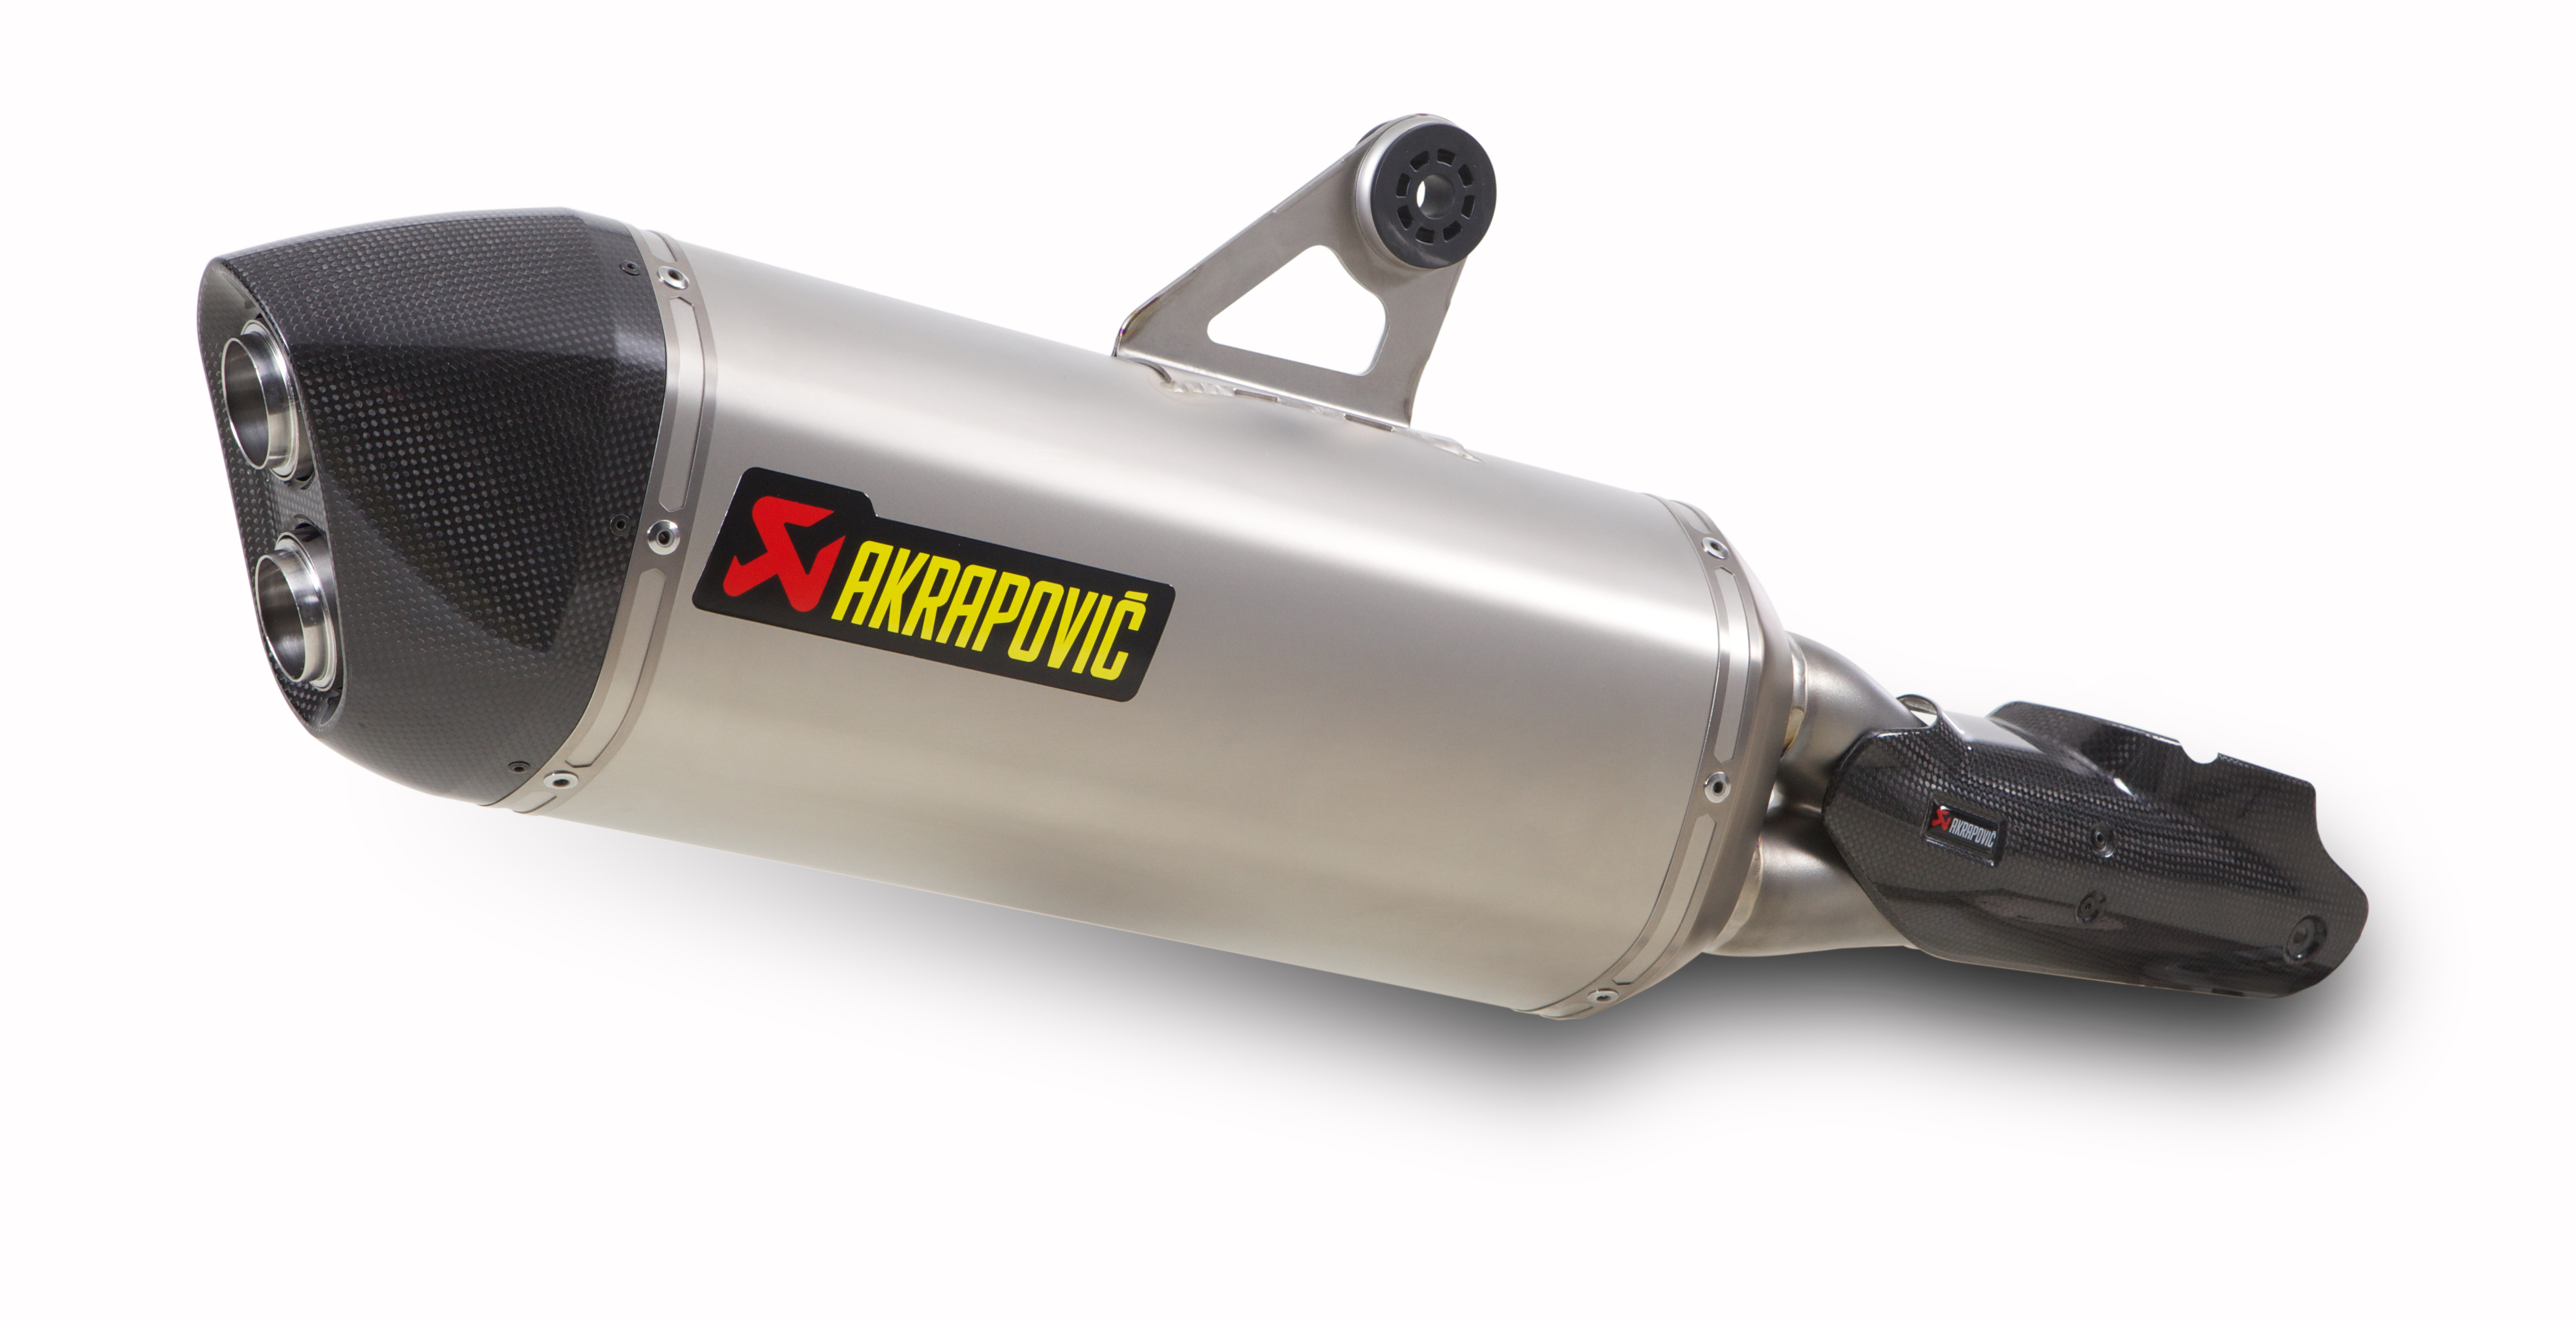 New: Akrapovic's slip on exhaust for the 2013 1200GS